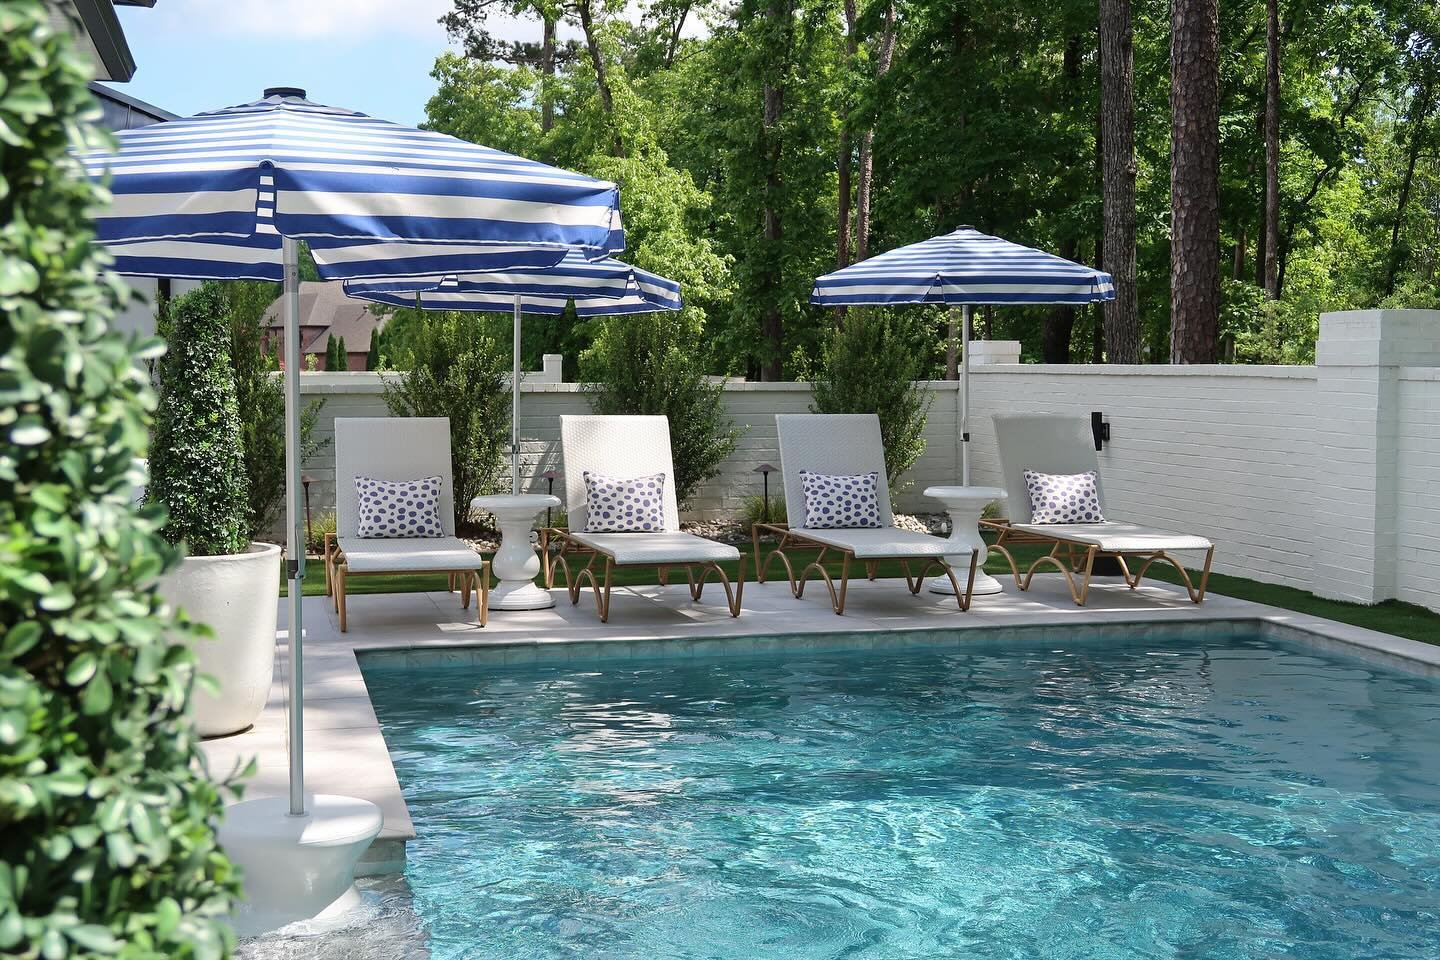 Who&rsquo;s ready for Summer?! Another relaxing Lounge Chair from @summerclassics 😍☀️#outdoor #outdoorliving #liveoutside #chenal #diningoutside #outdoorspaces #littlerock #backyard 💕

Design by: @ljstagg